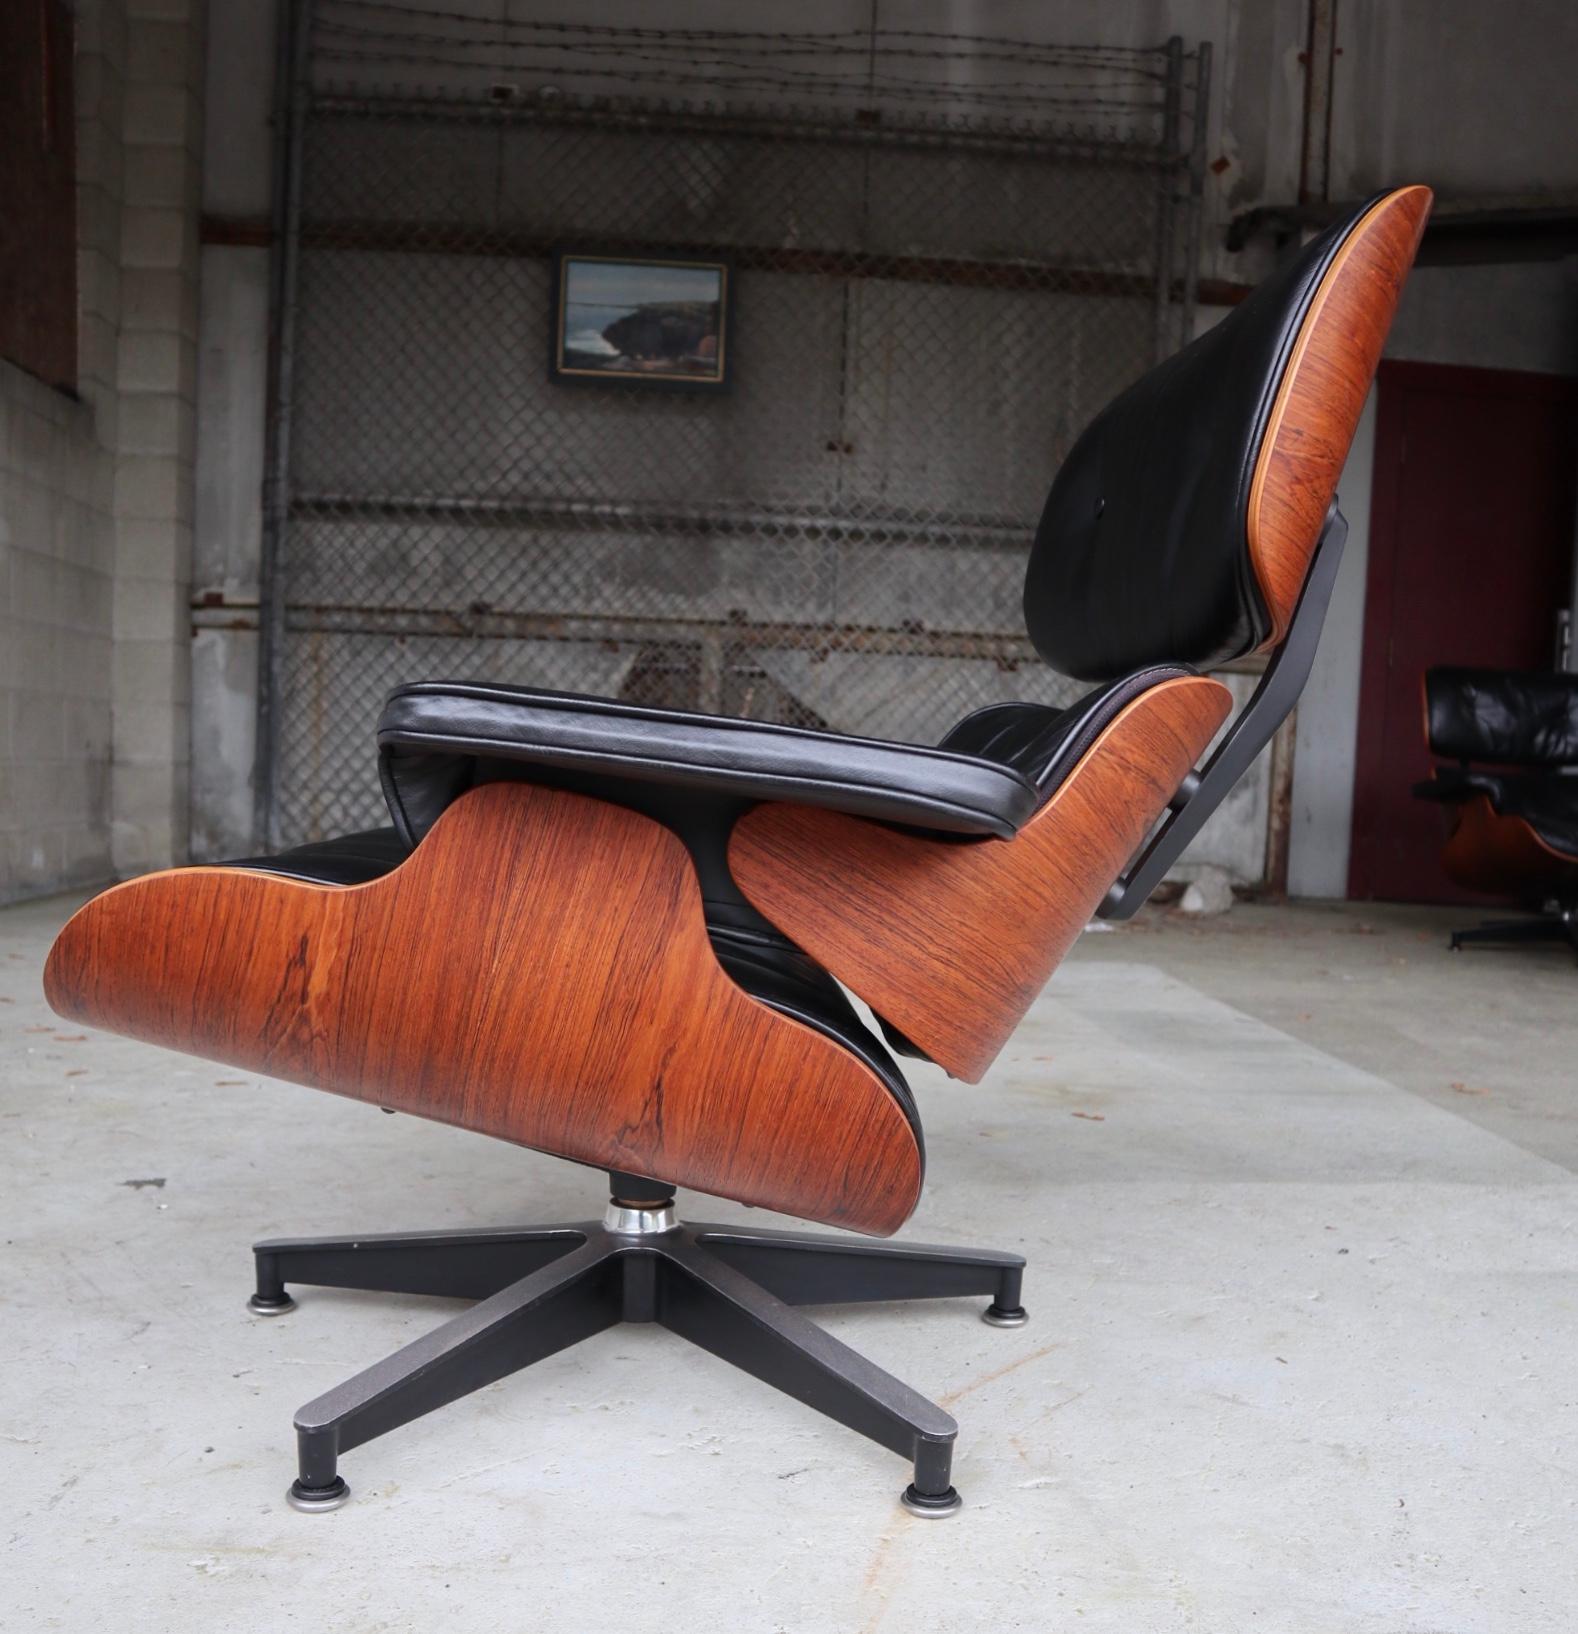 Gorgeous example of the iconic Herman Miller Eames lounge chair. Stunning vibrant color of the rosewood shells with original black leather cushions. Attractive even grains. Cushions extremely comfortable. The perfect lounge chair!